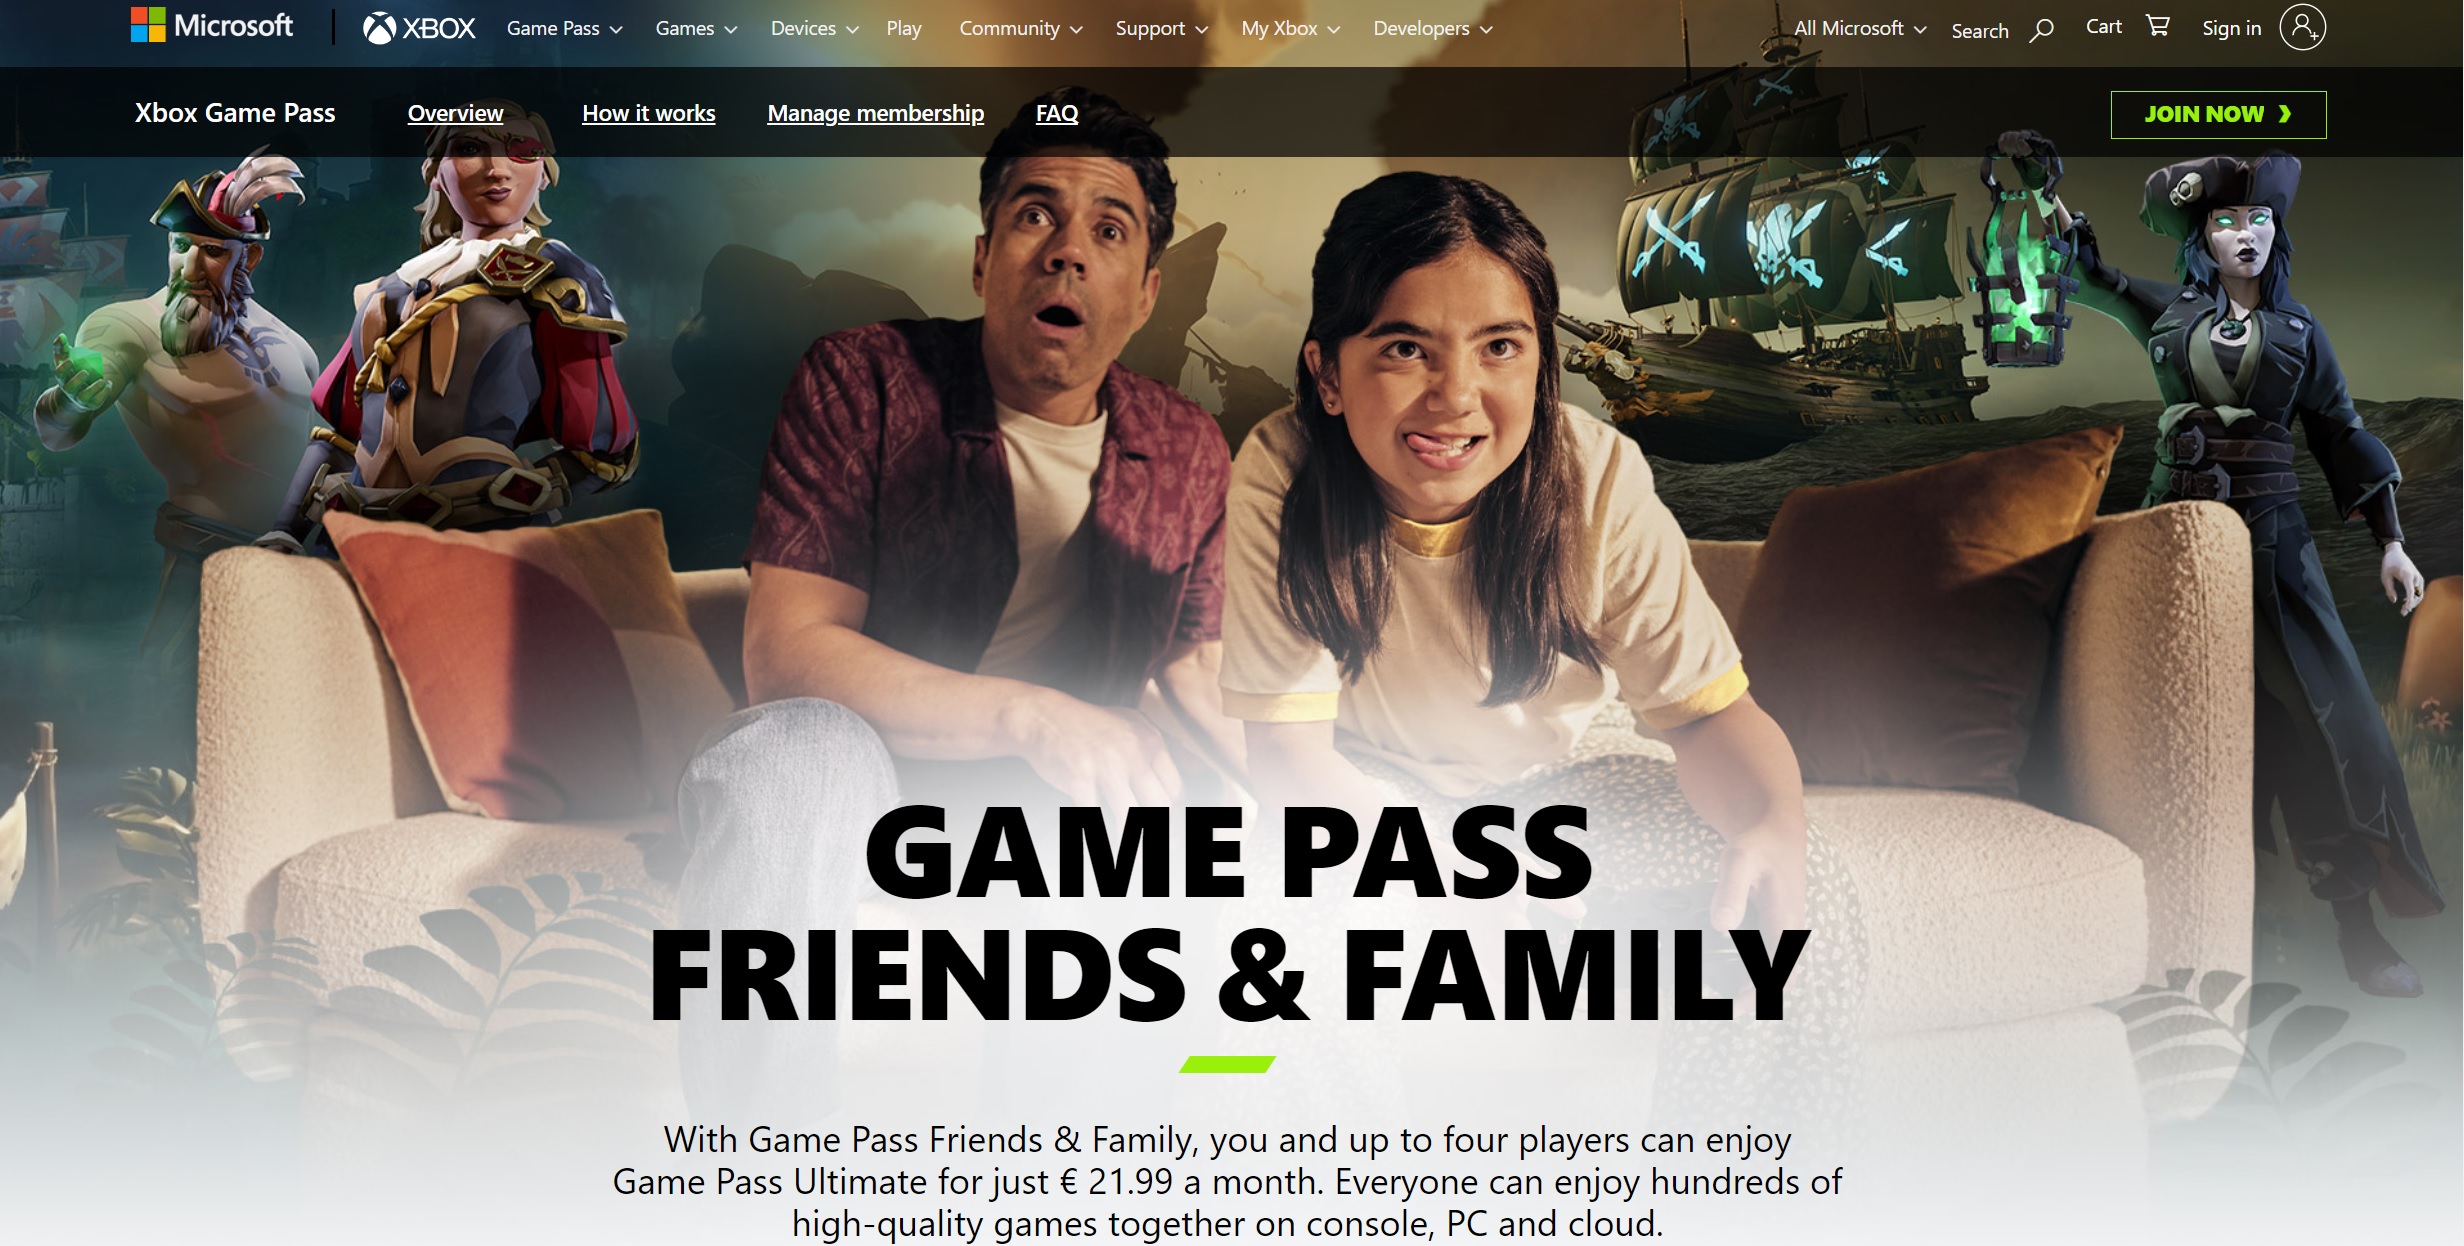 Xbox Game Pass Friends and Family plan image